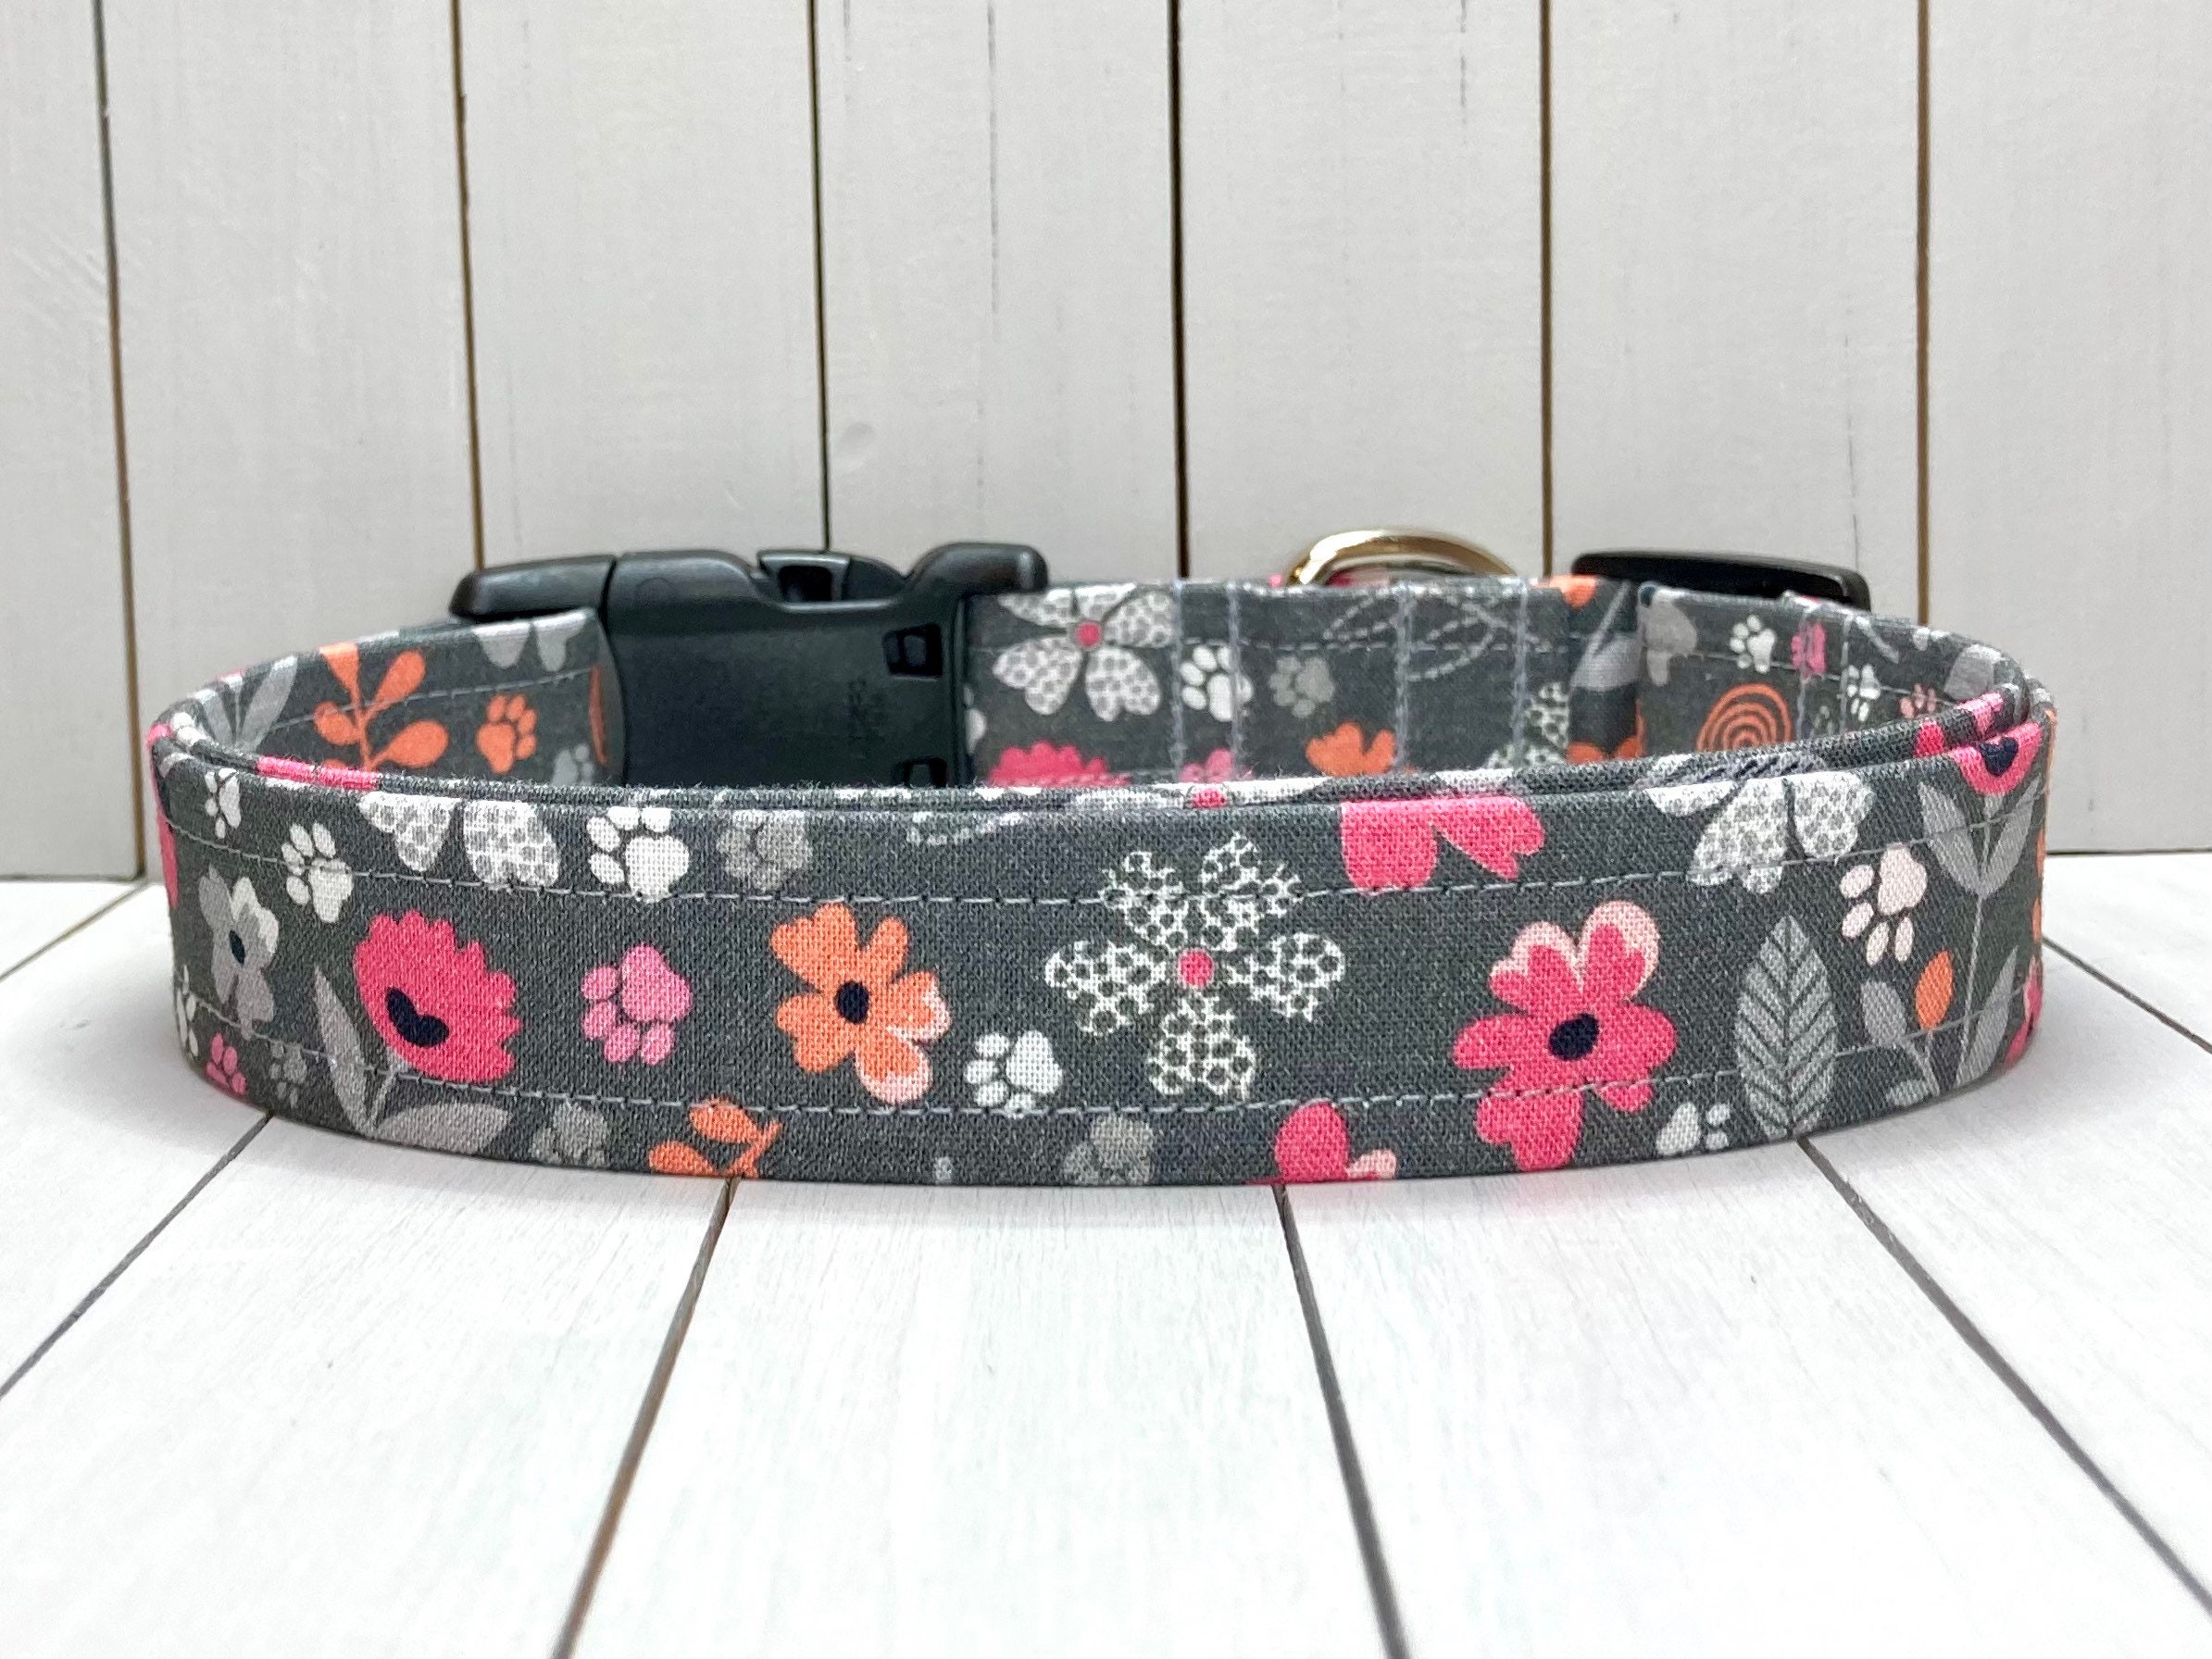 Merbary Basic Nylon Dog Collar, Adjustable for Small, Medium, Large pet and  Puppies Accessories, Cute Colors for Male, Female, boy, Girl, Puppy 